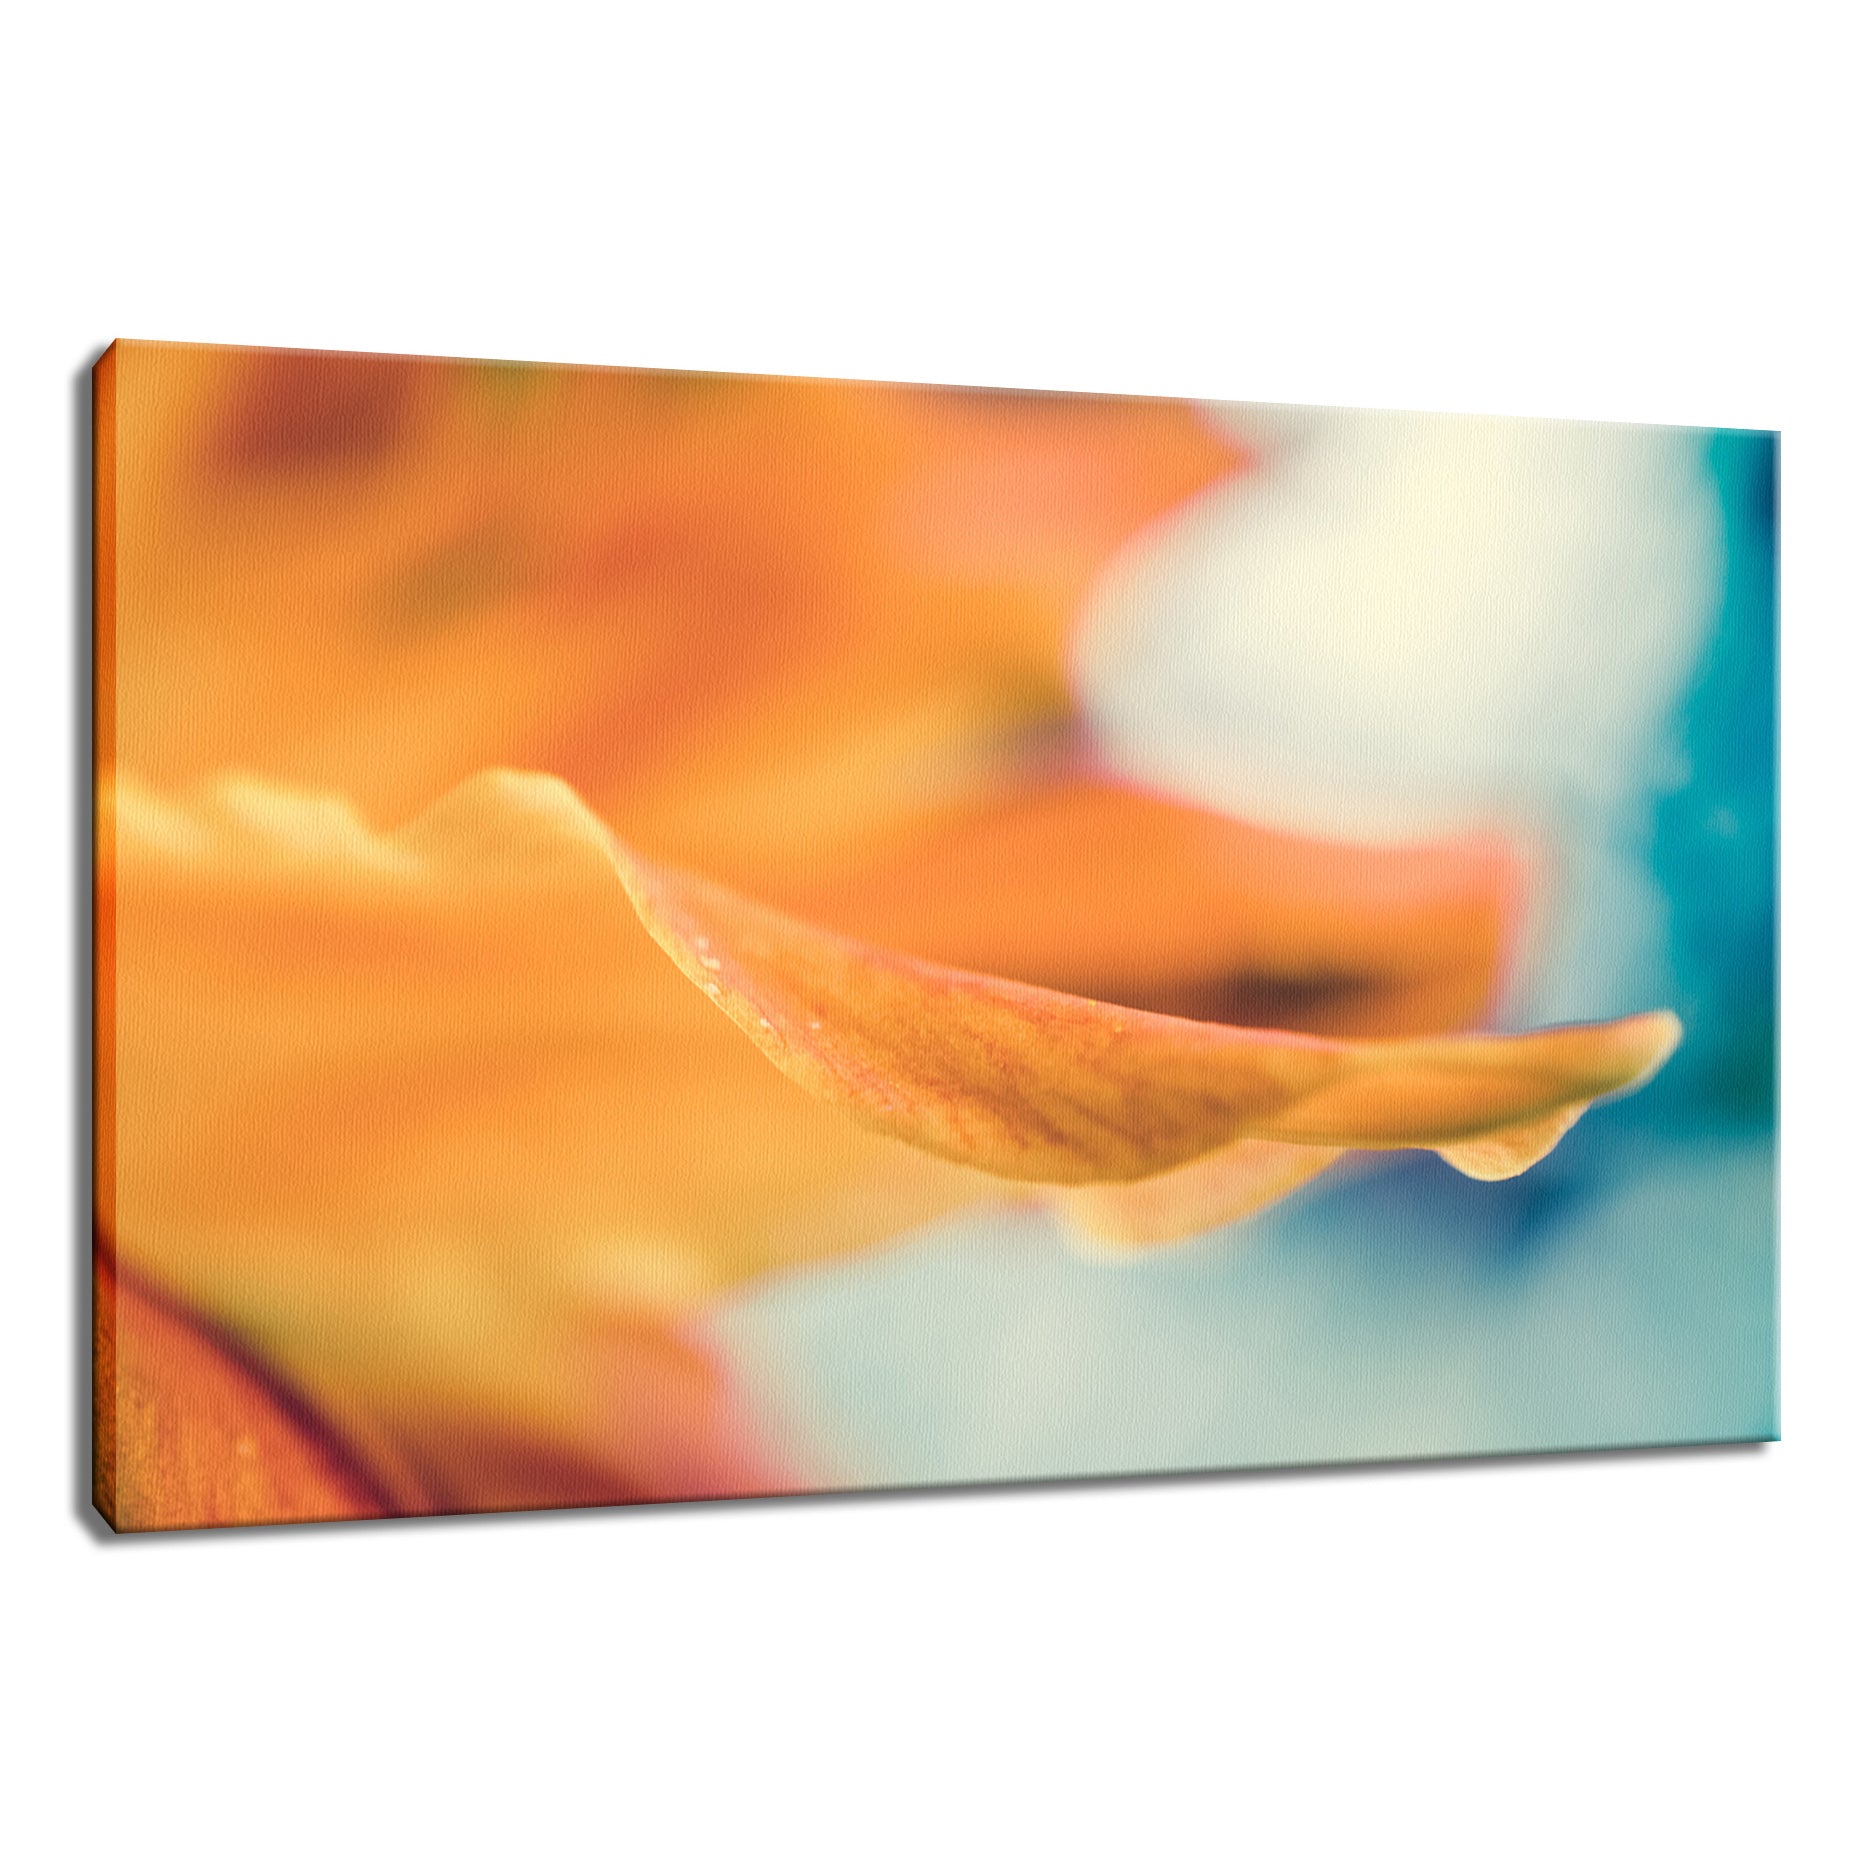 Serene Petals of Life Nature / Floral Photo Fine Art Canvas Wall Art Prints  - PIPAFINEART